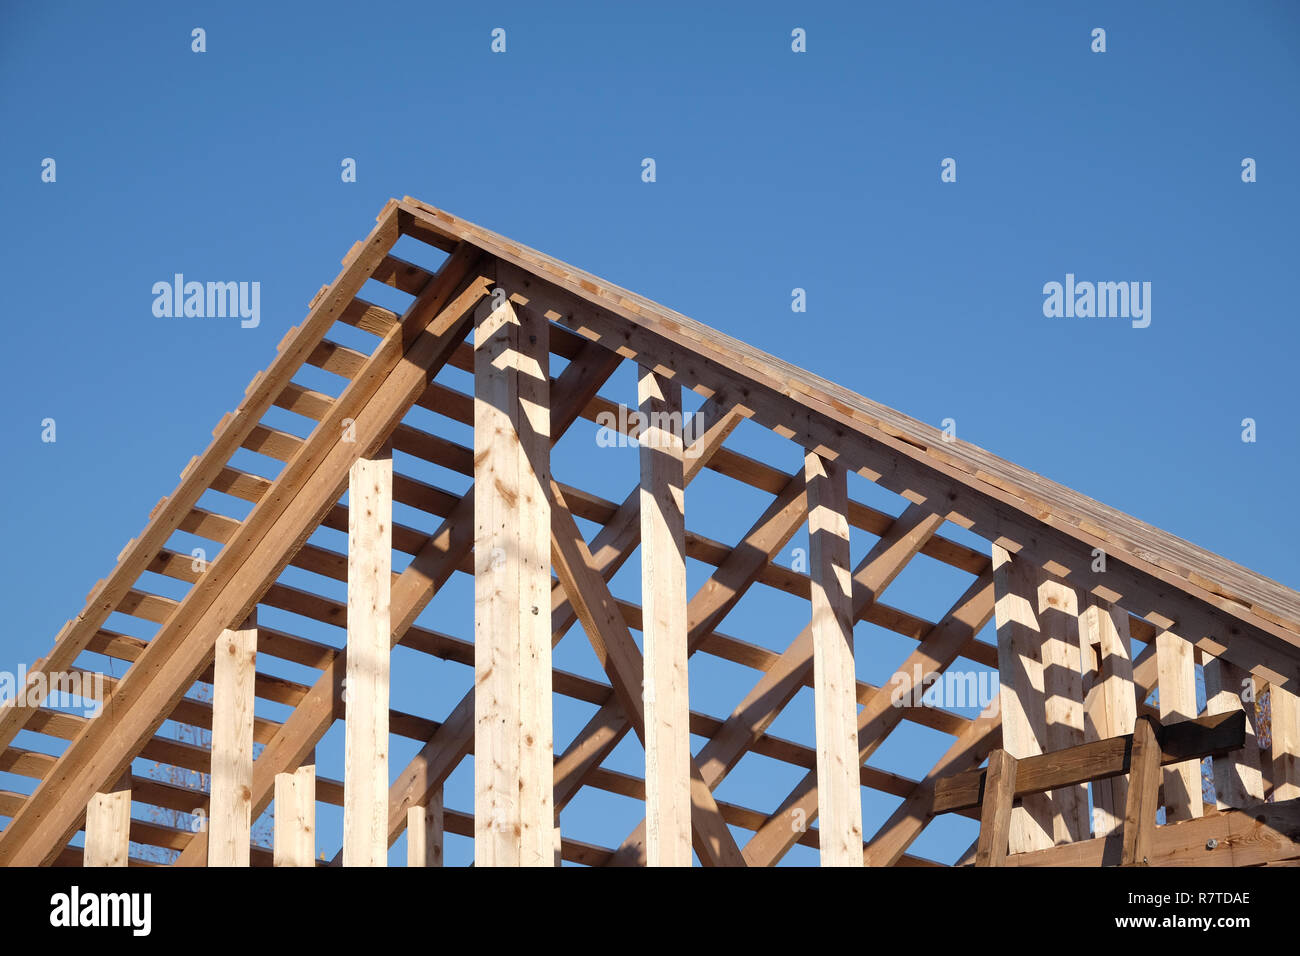 Process of wooden carcass house mounting ubder clear cloudless blue sky side view. Wooden country house construction Stock Photo